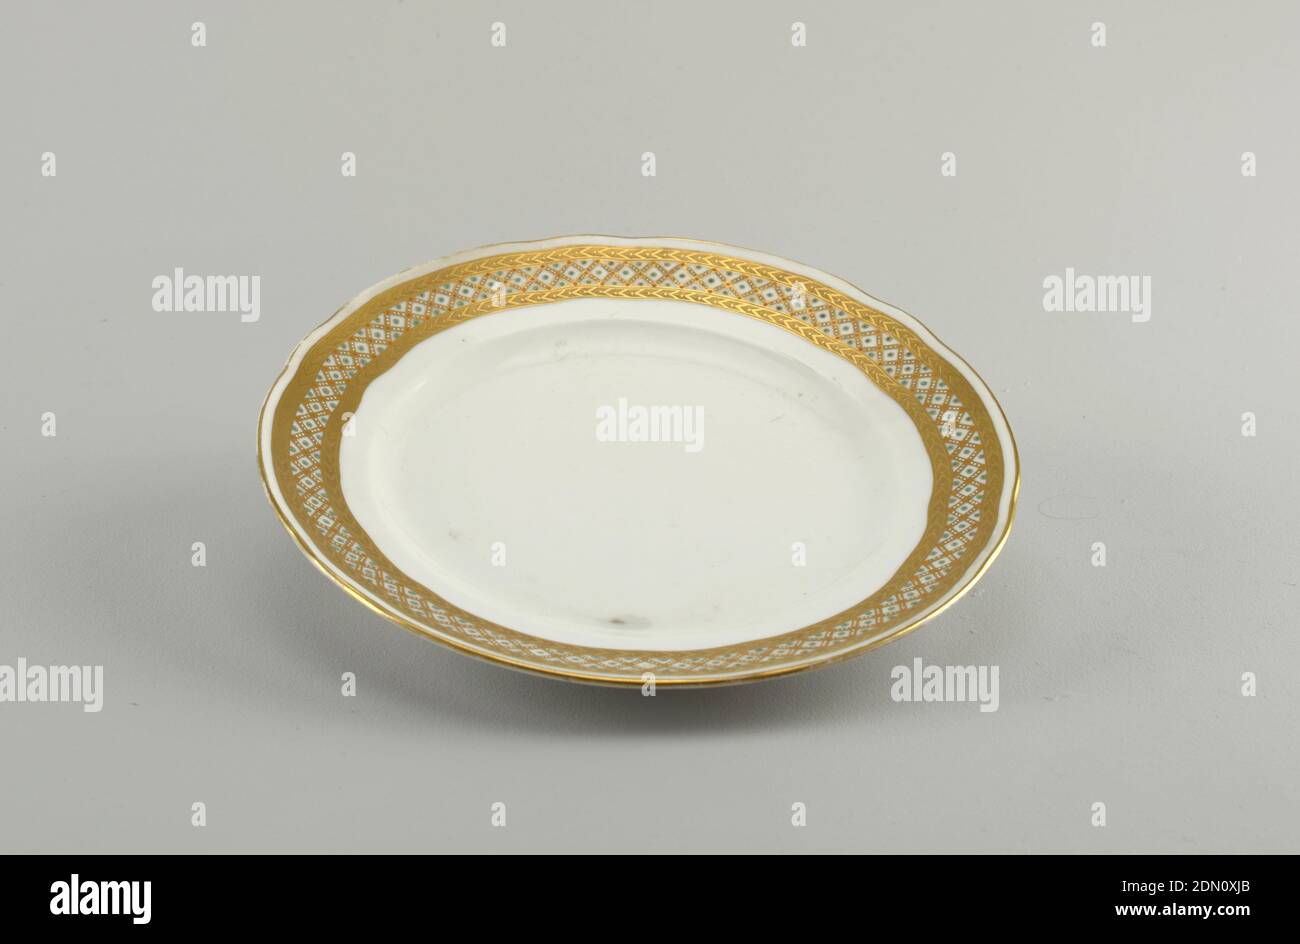 Plate, porcelain, overglaze decoration, Shaped edge with two bands of etched gold: between them, gold lattice with white and orange dots, and turquoise dots in spaces., St. Petersburg, Russia, late 19th century, ceramics, Decorative Arts, Plate Stock Photo